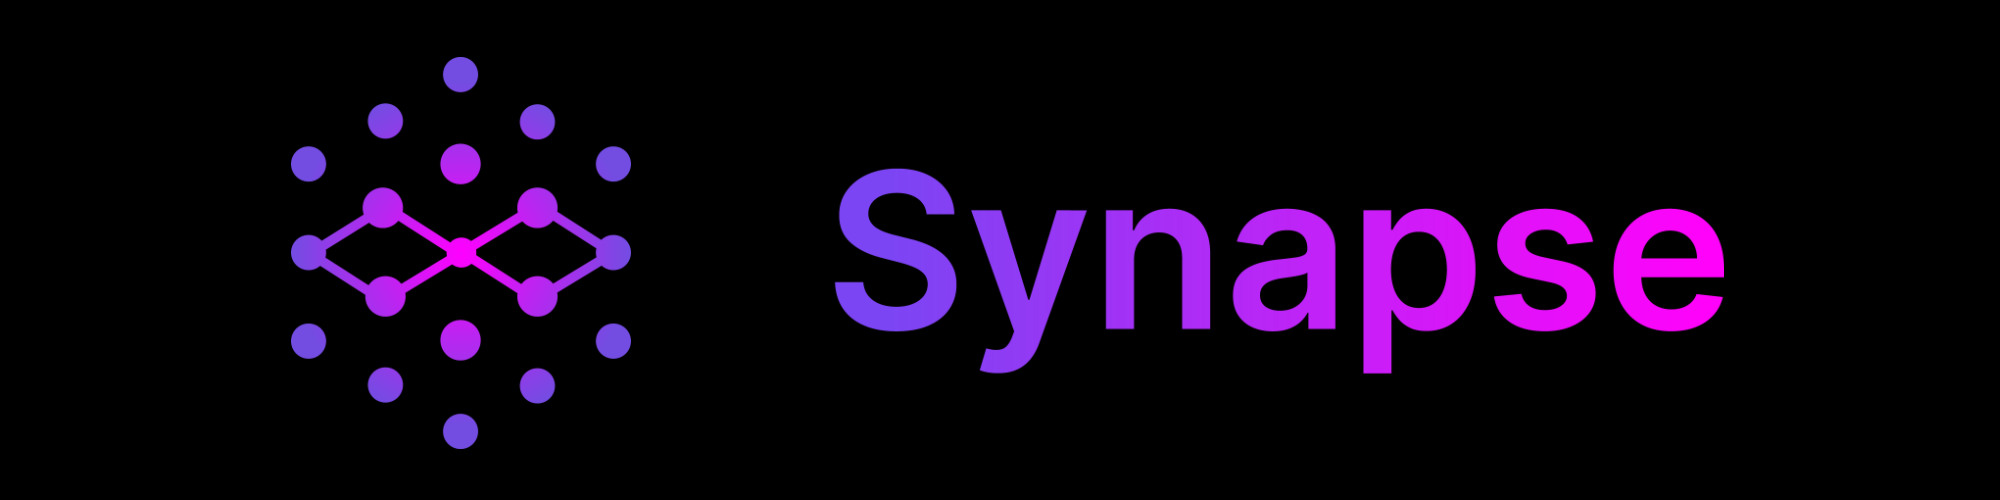 Welcome to Synapse - Synapse Protocol